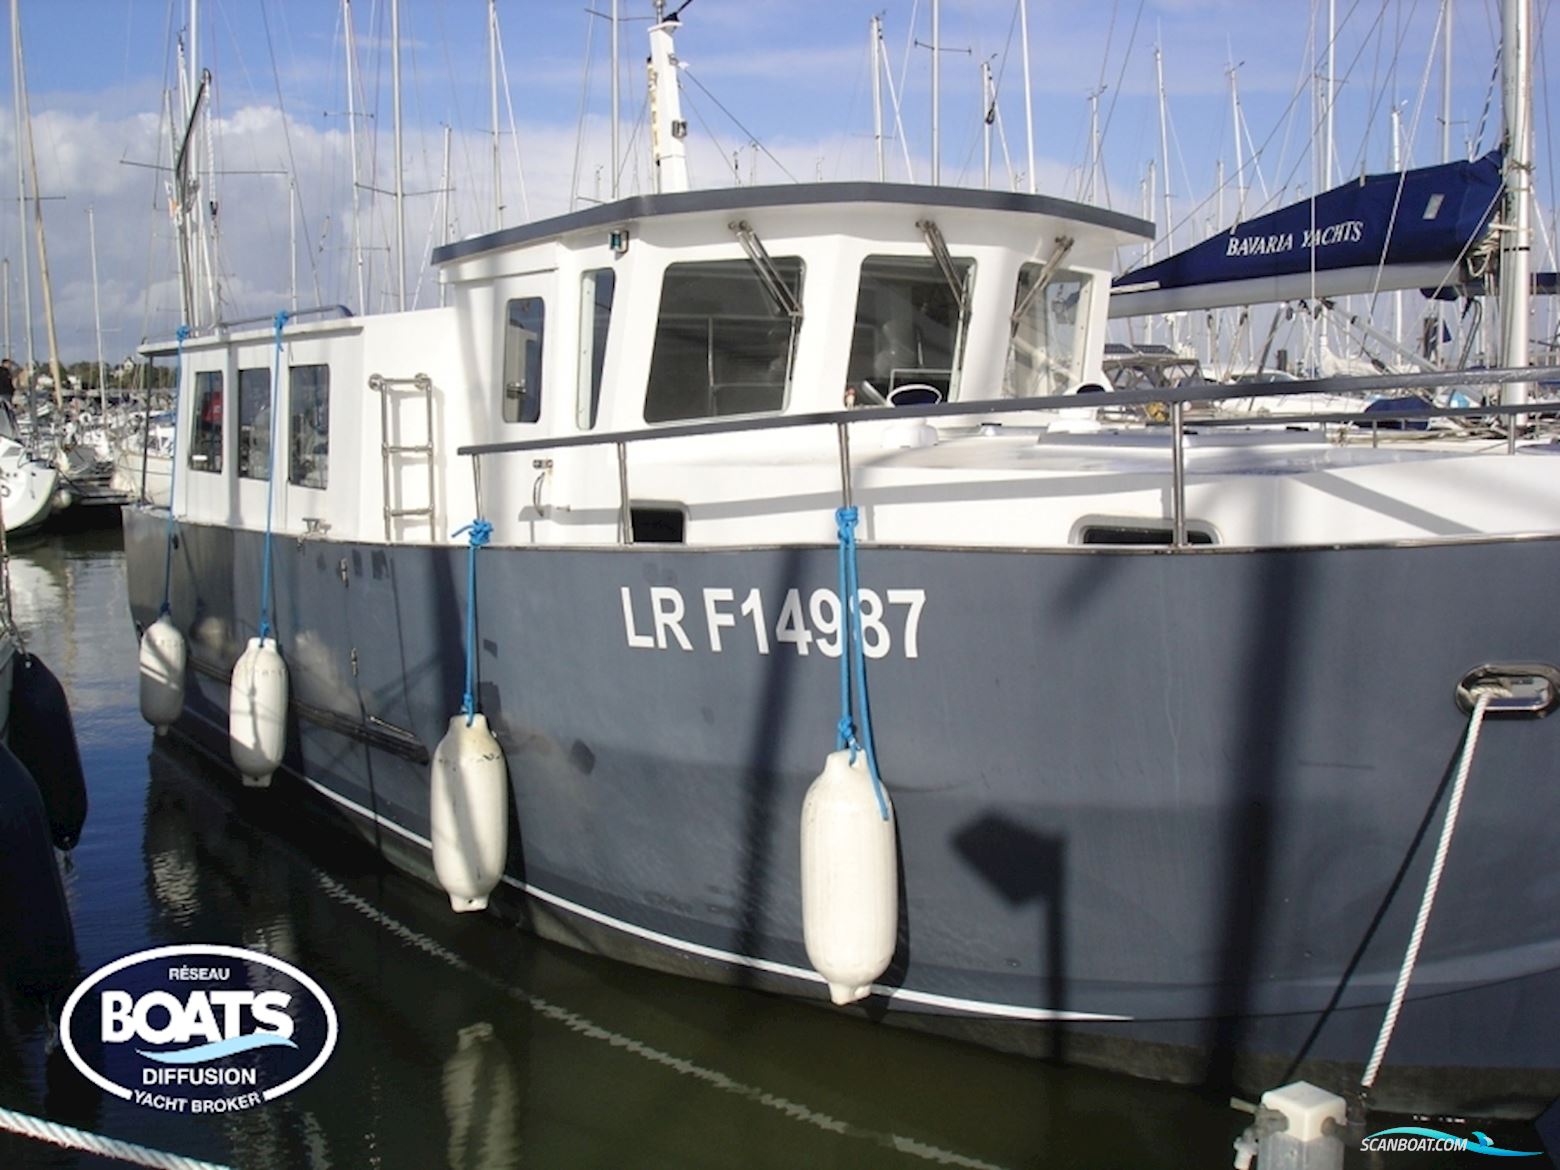 Construction Amateur Trawler Coaster 32 Motor boat 2014, with Midif 3150 engine, France